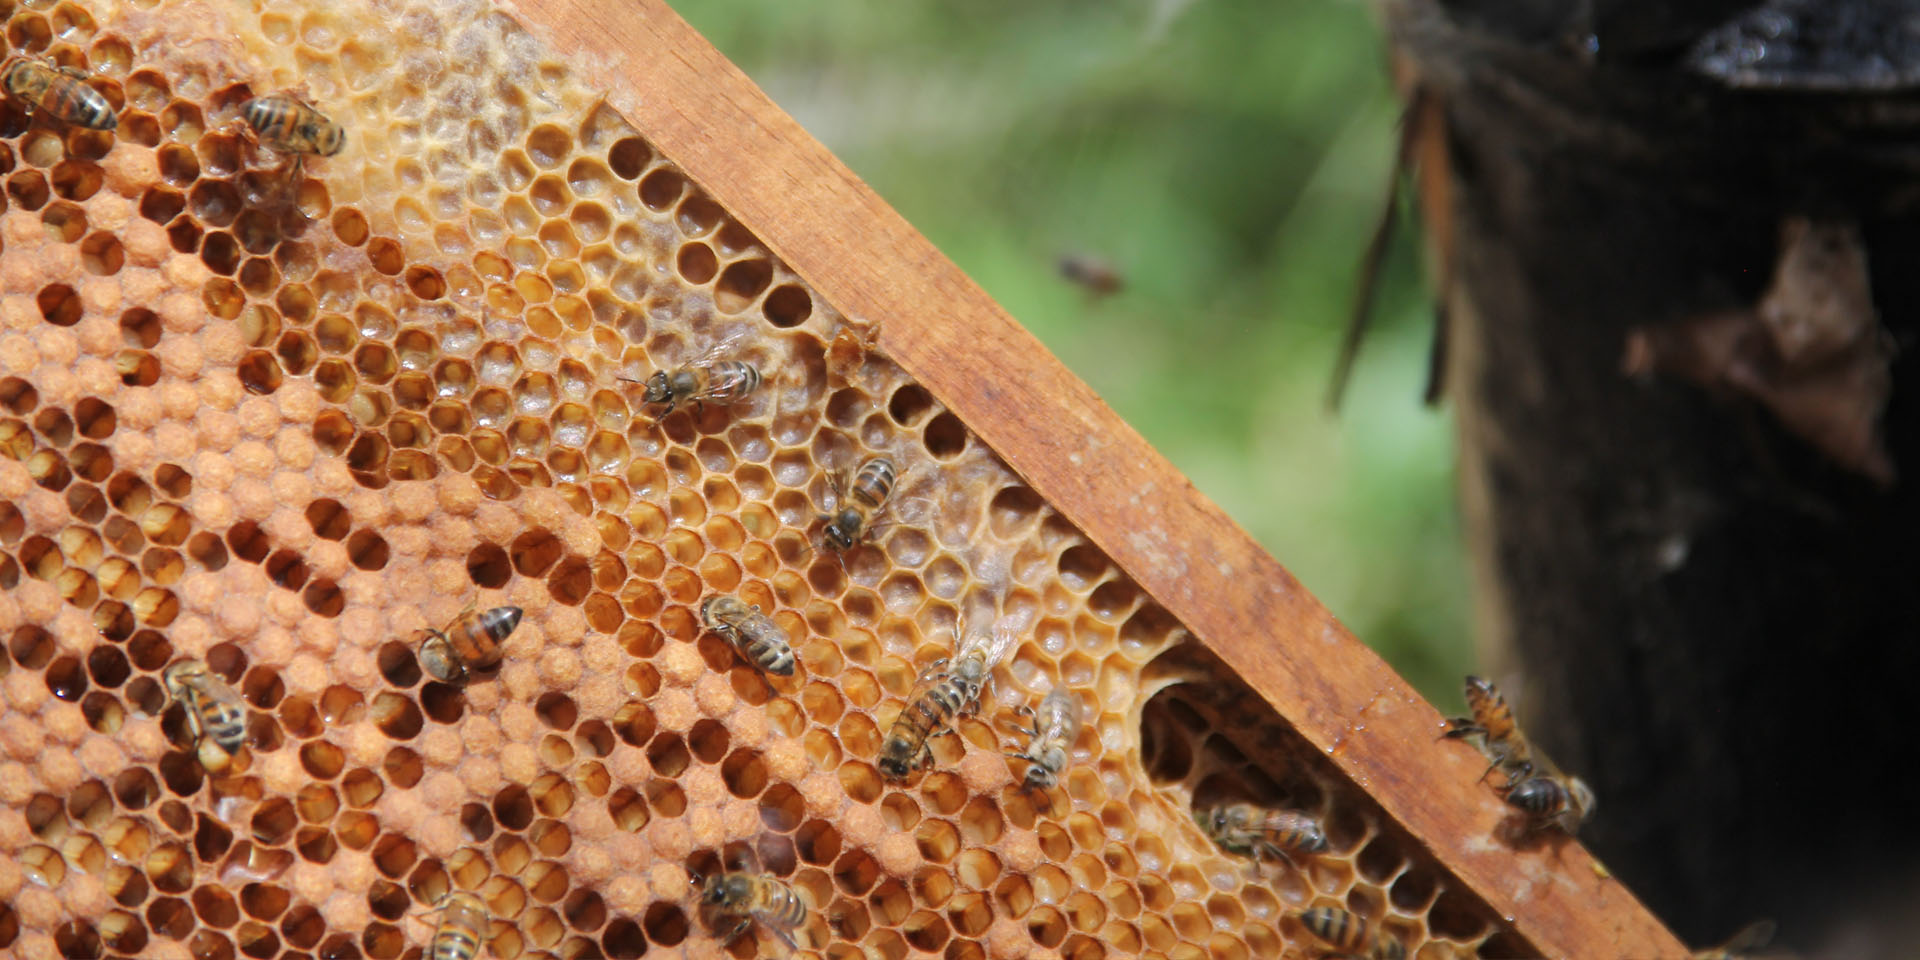 Close-up image of a beehive set in a bee box frame.